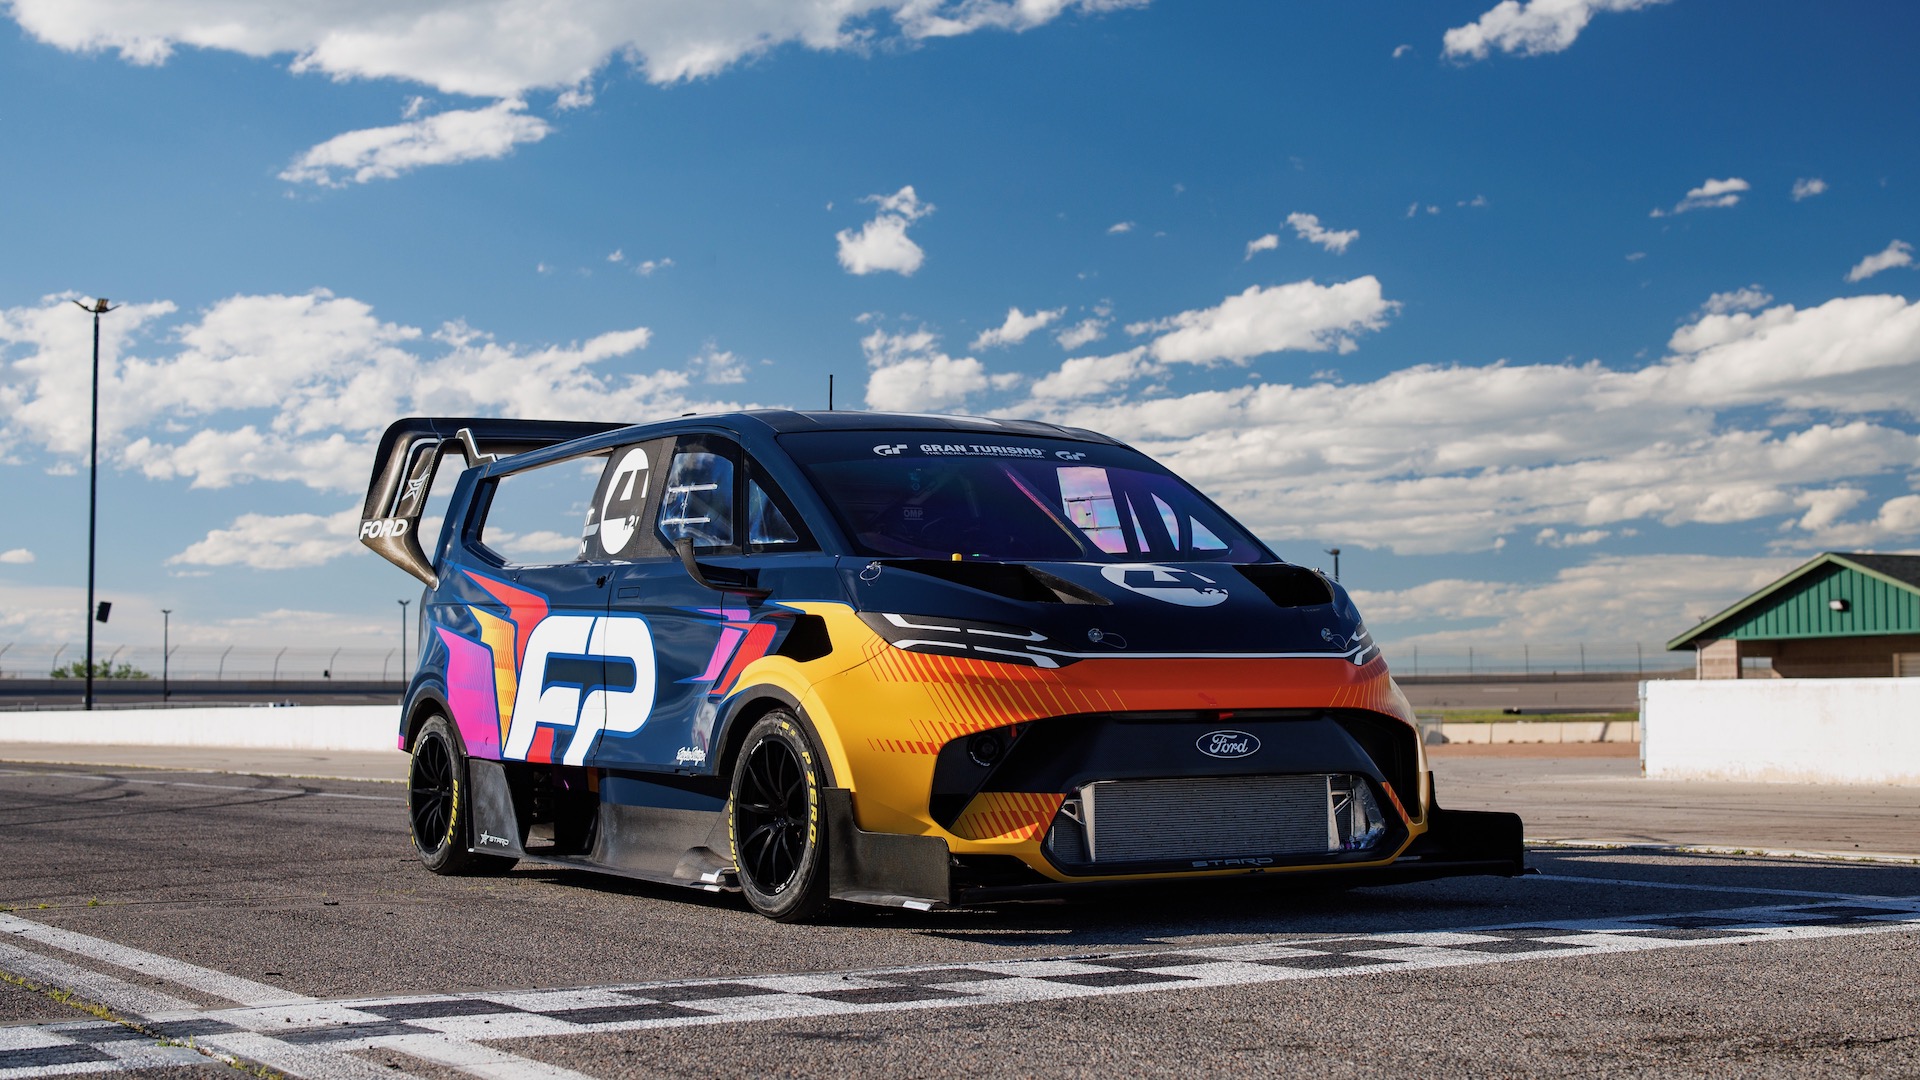 Ford Supervan 4.2 aims for Pikes Peak with over 1,400 hp and 4,400 pounds of downforce Auto Recent